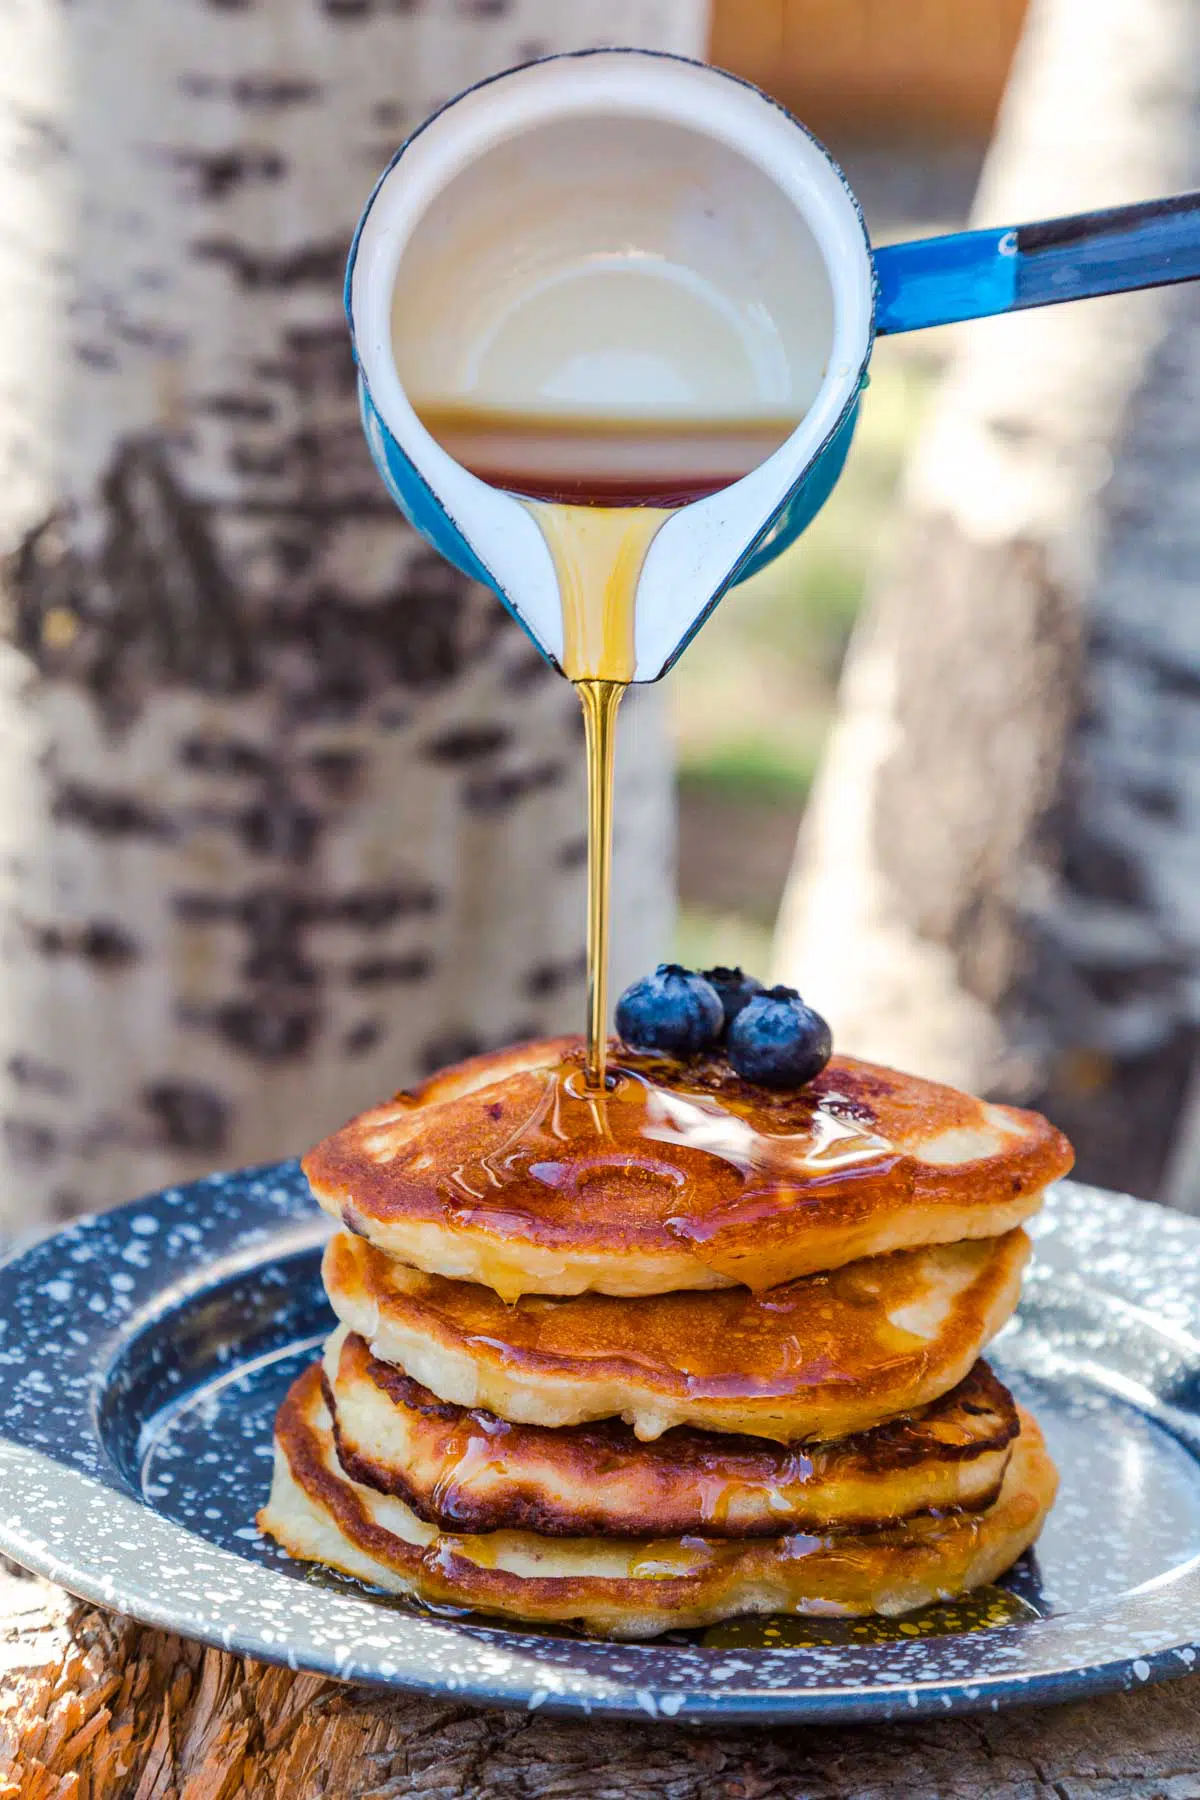 Pouring maple syrup over a stack of blueberry banana pancakes